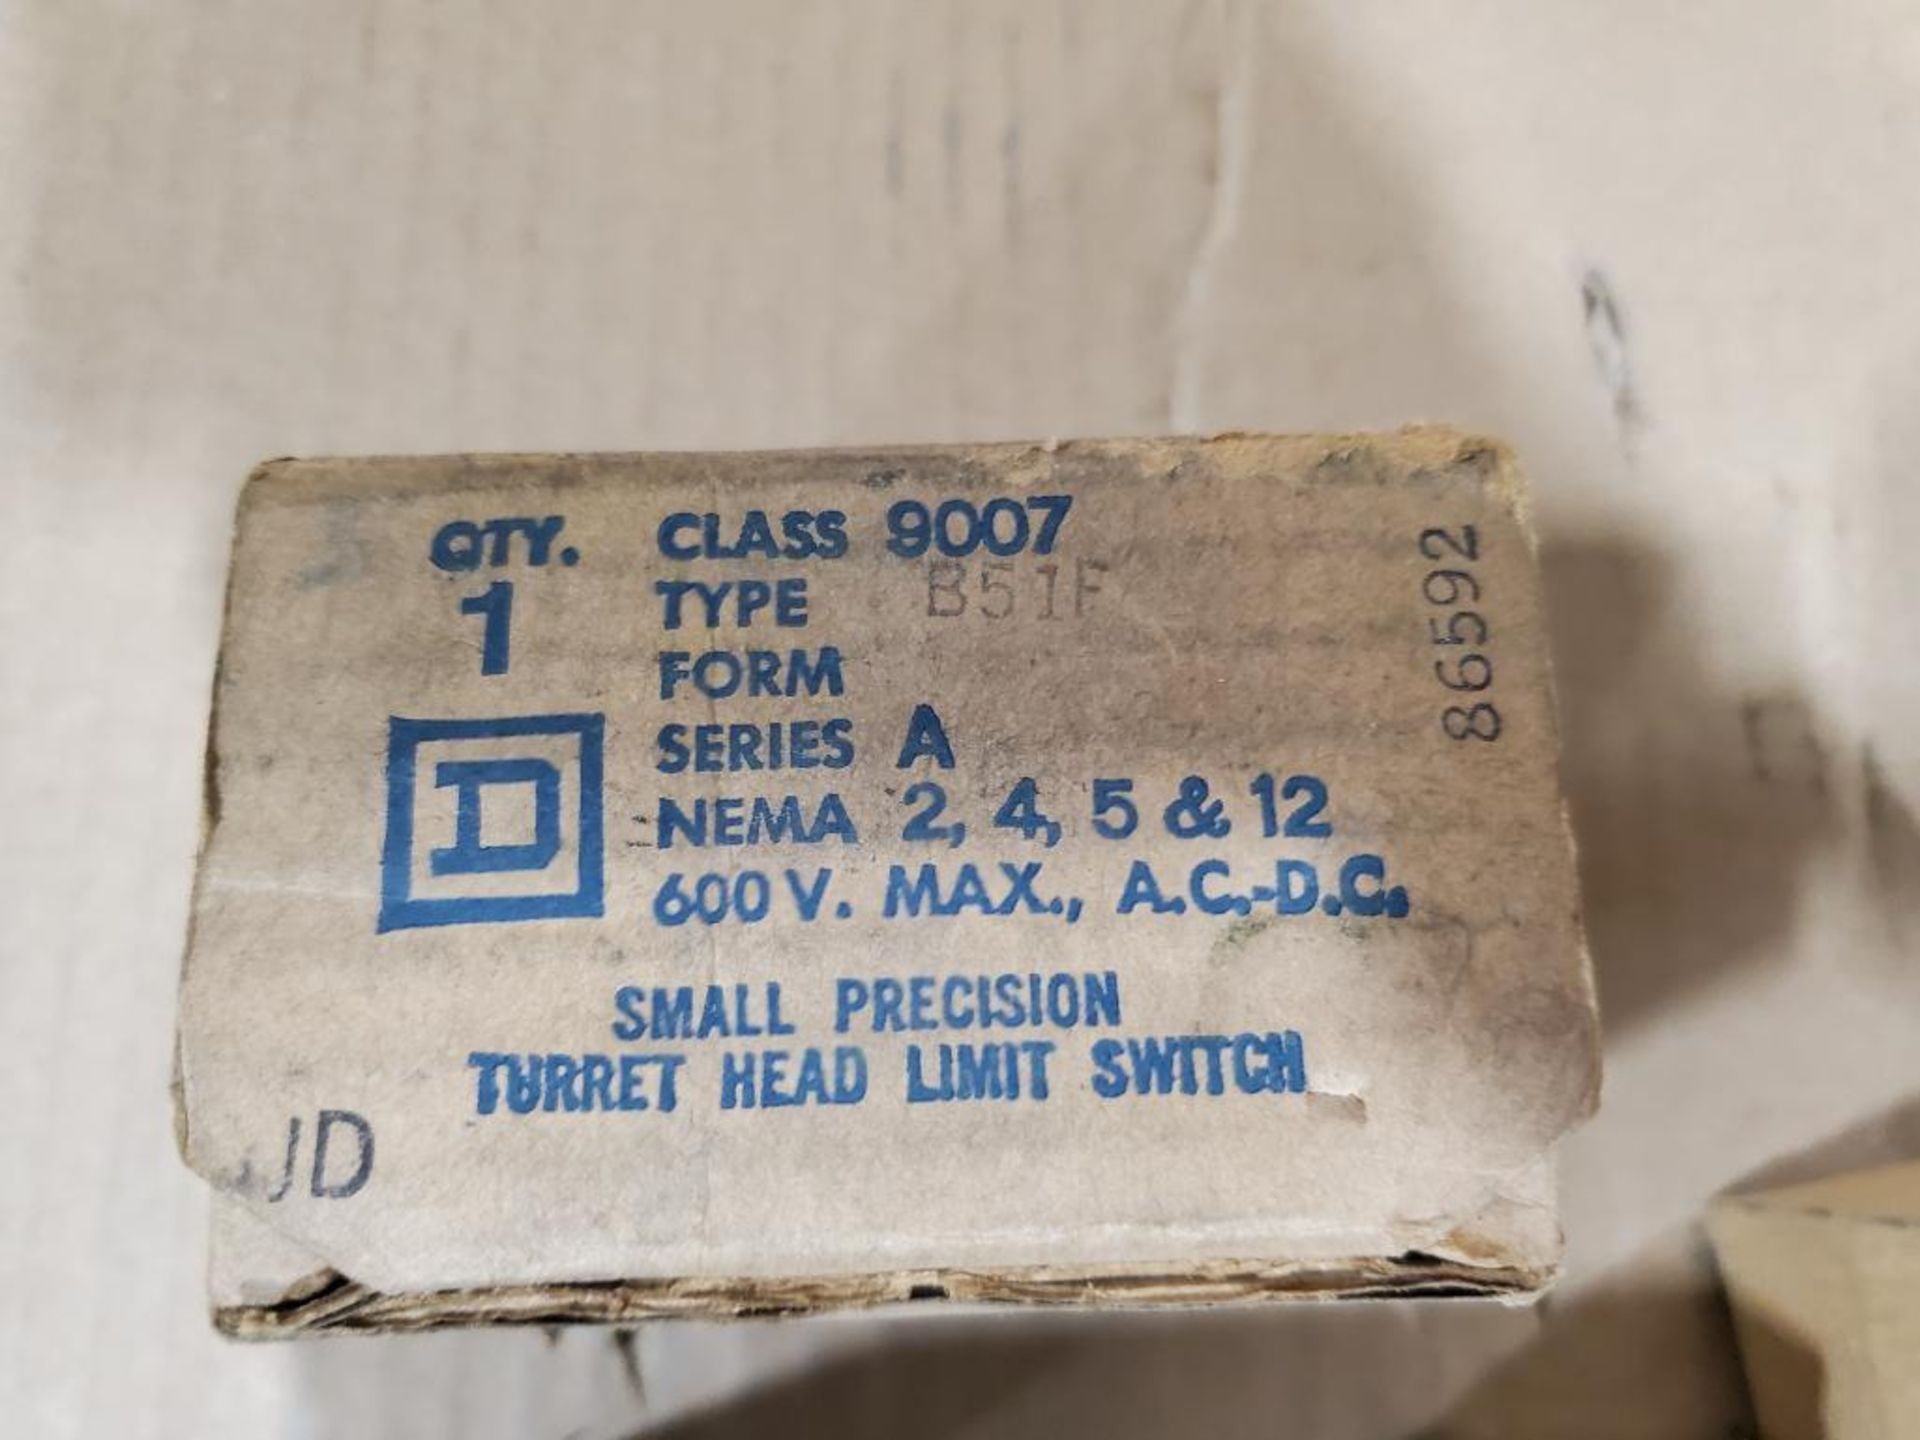 Assorted Square D, Eaton, and Honeywell electrical parts. - Image 3 of 9